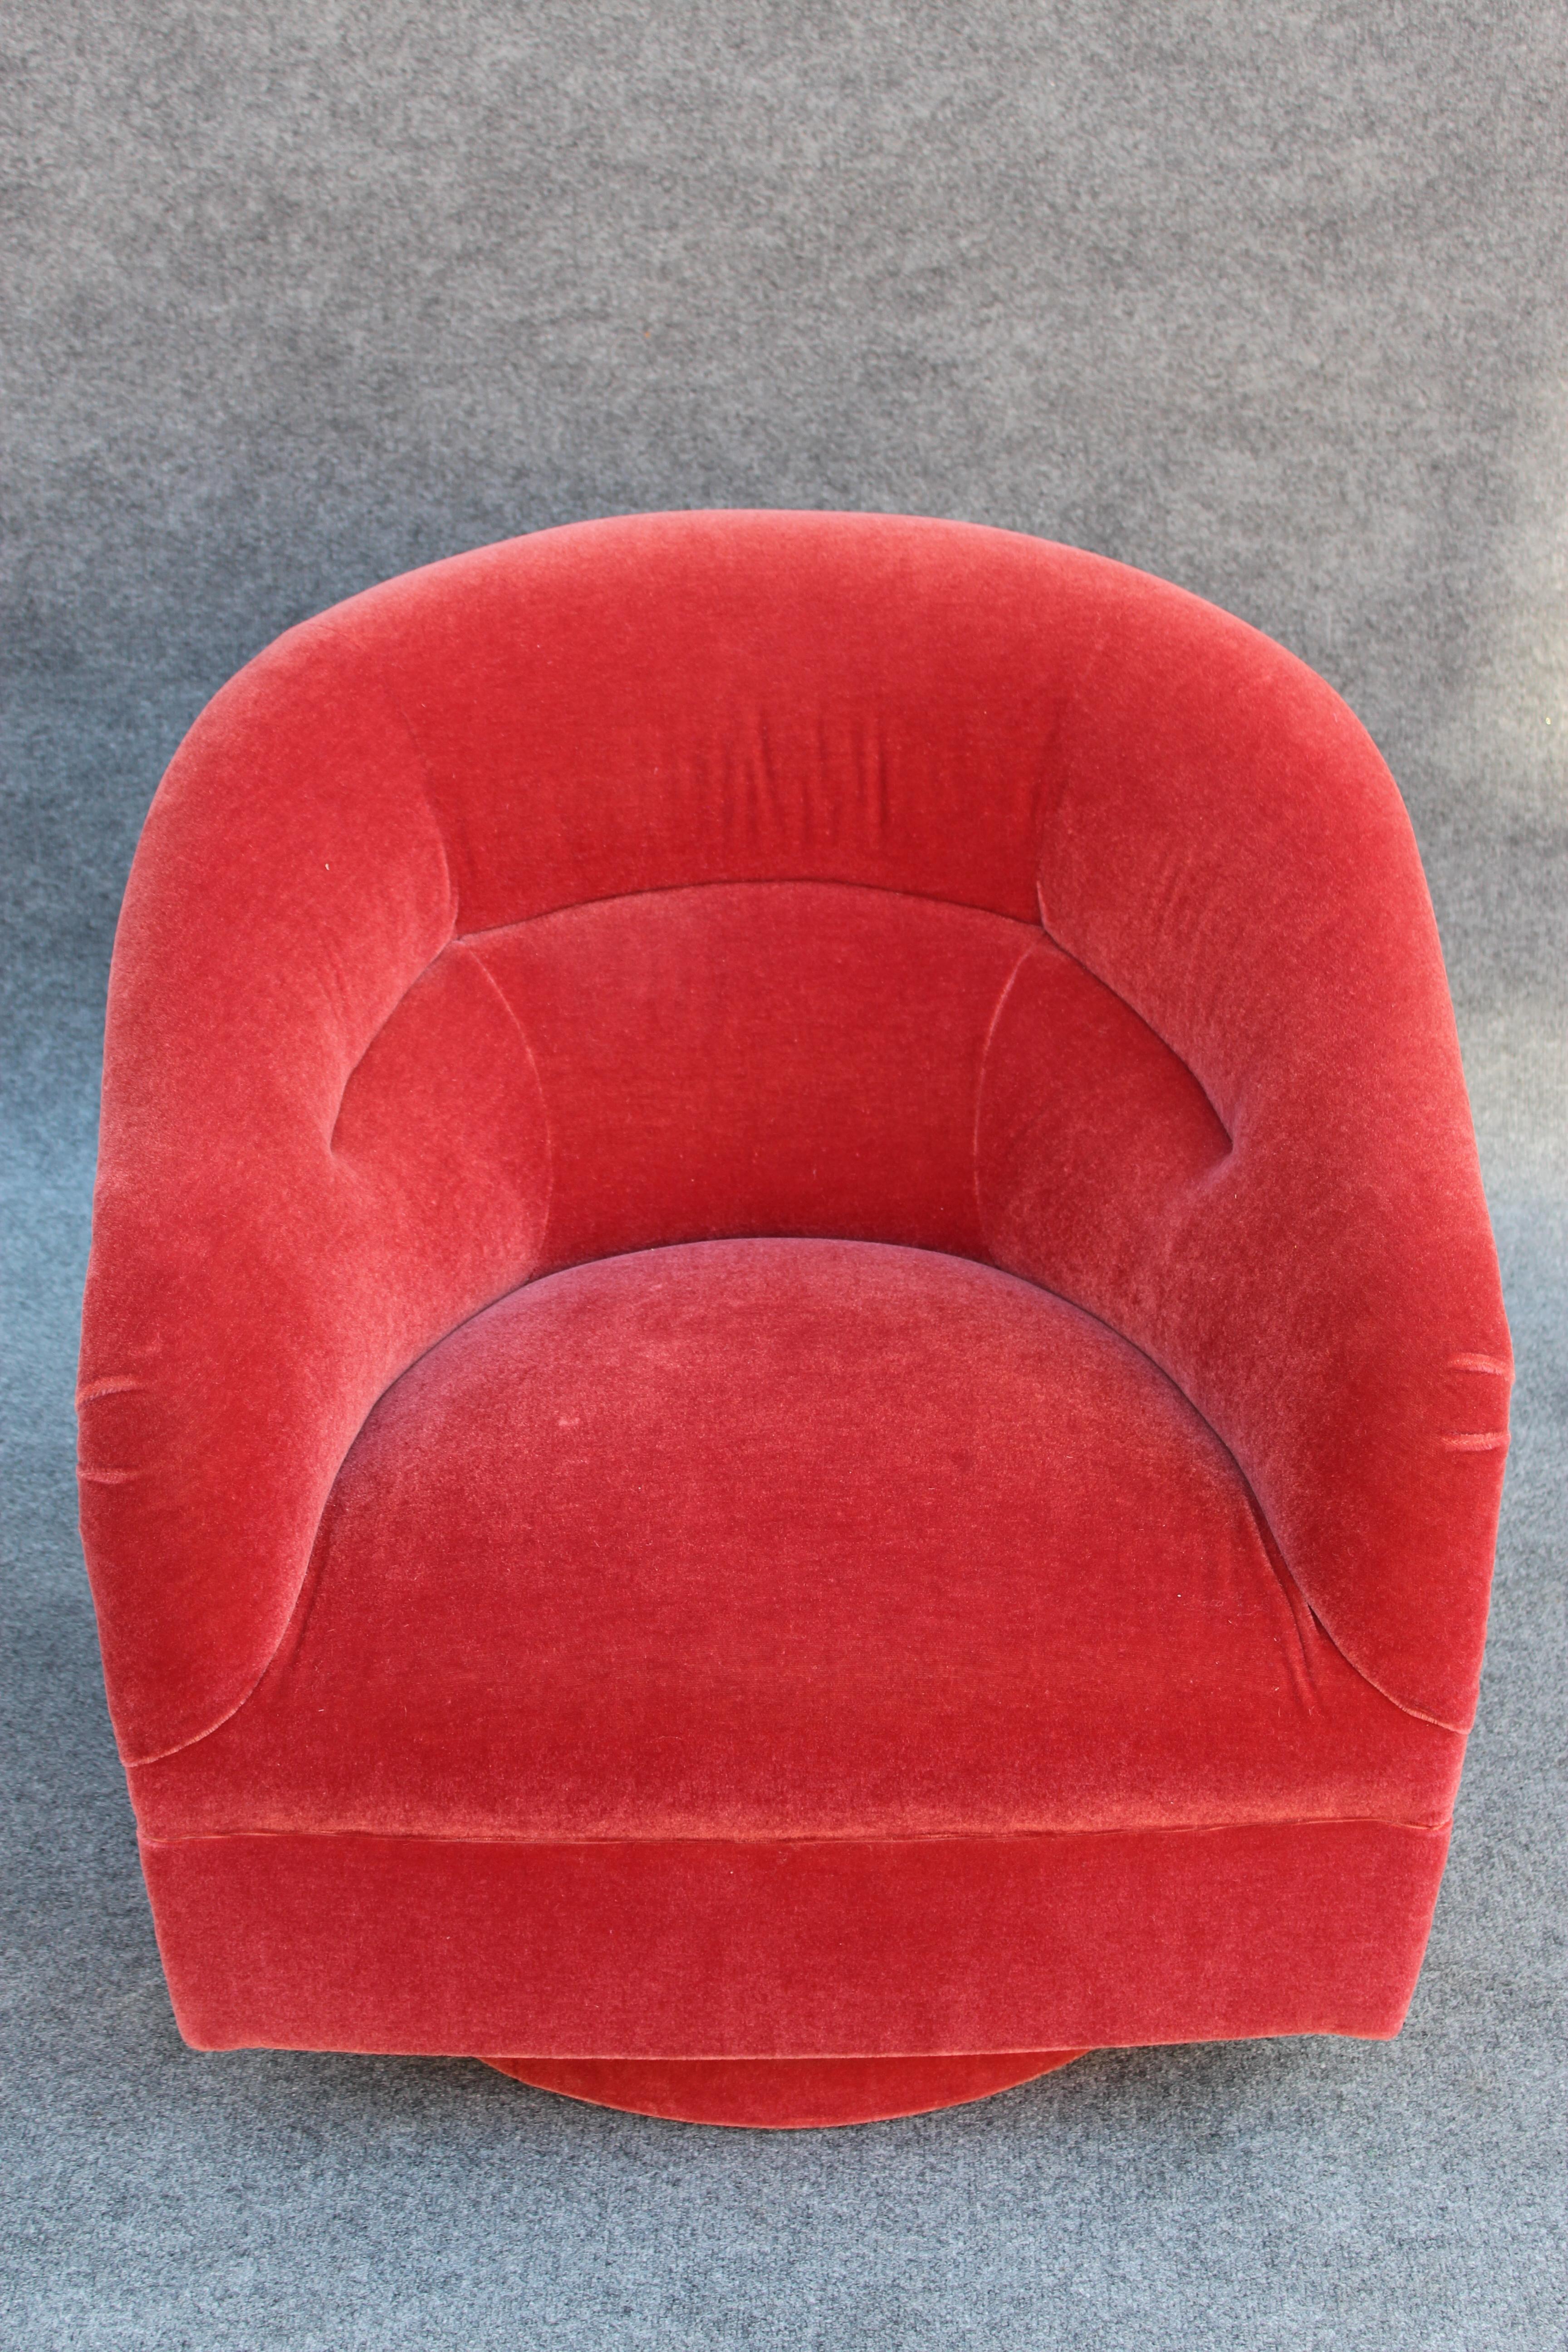 Ward Bennett Brickel Red Mohair Upholstered Swivel Tub Lounge Chair With Ottoman For Sale 10